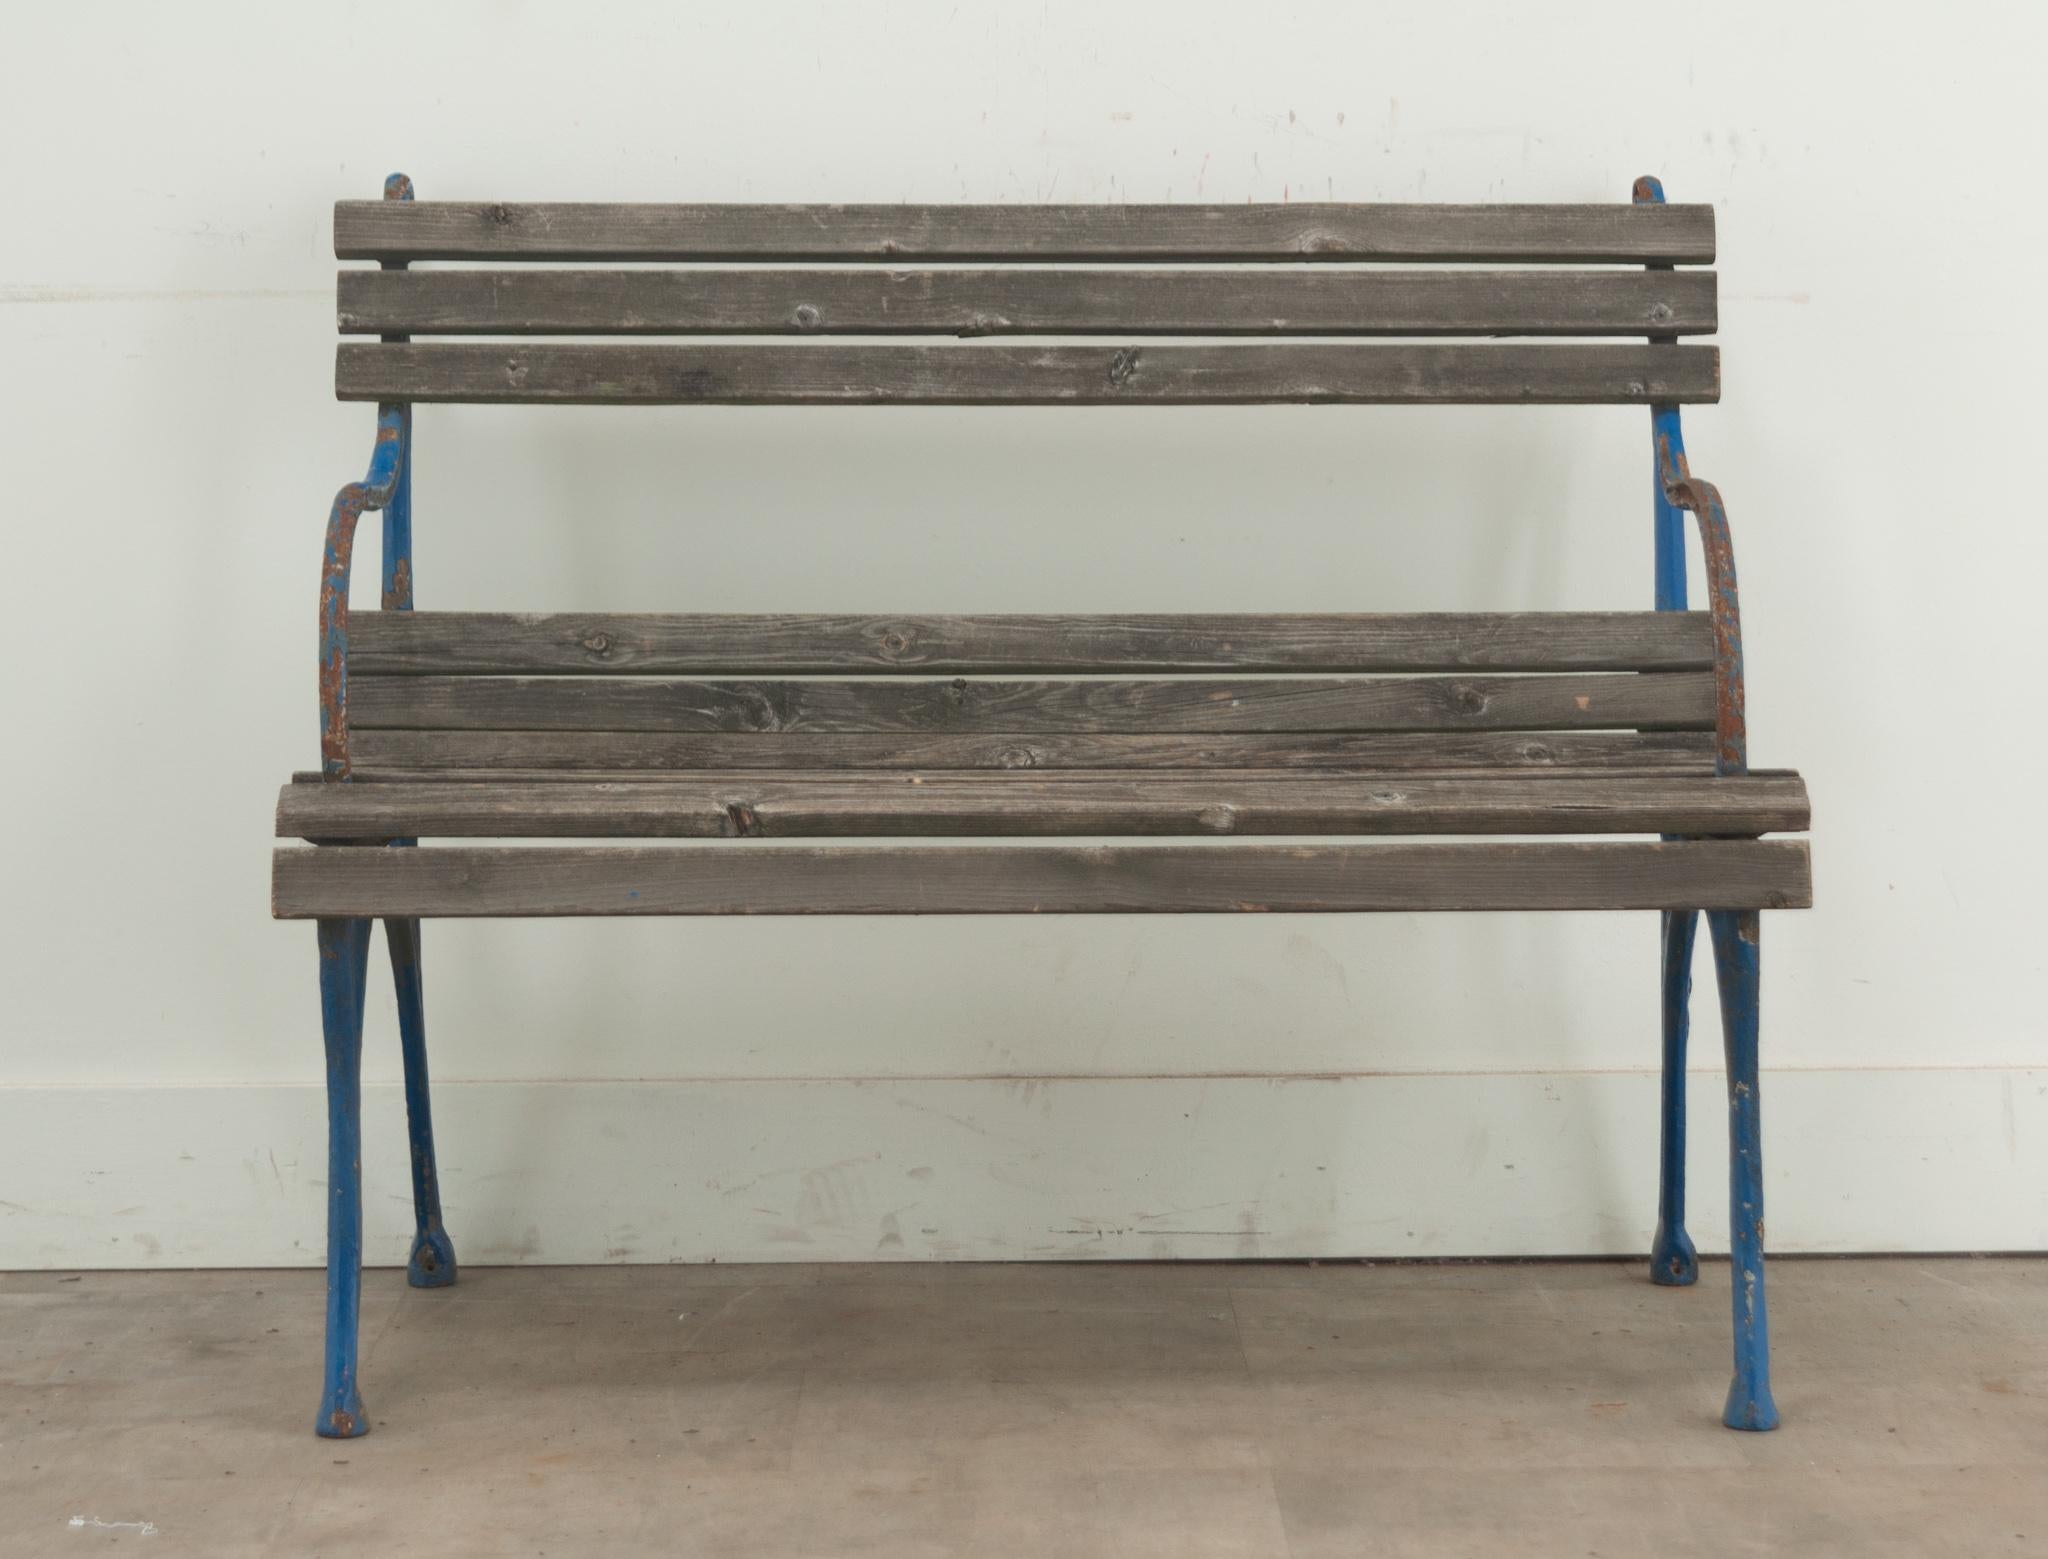 A petite cast iron and wood garden bench from France with a brilliant blue painted finish. Be sure to view the detailed images to see the current condition of this garden seat.